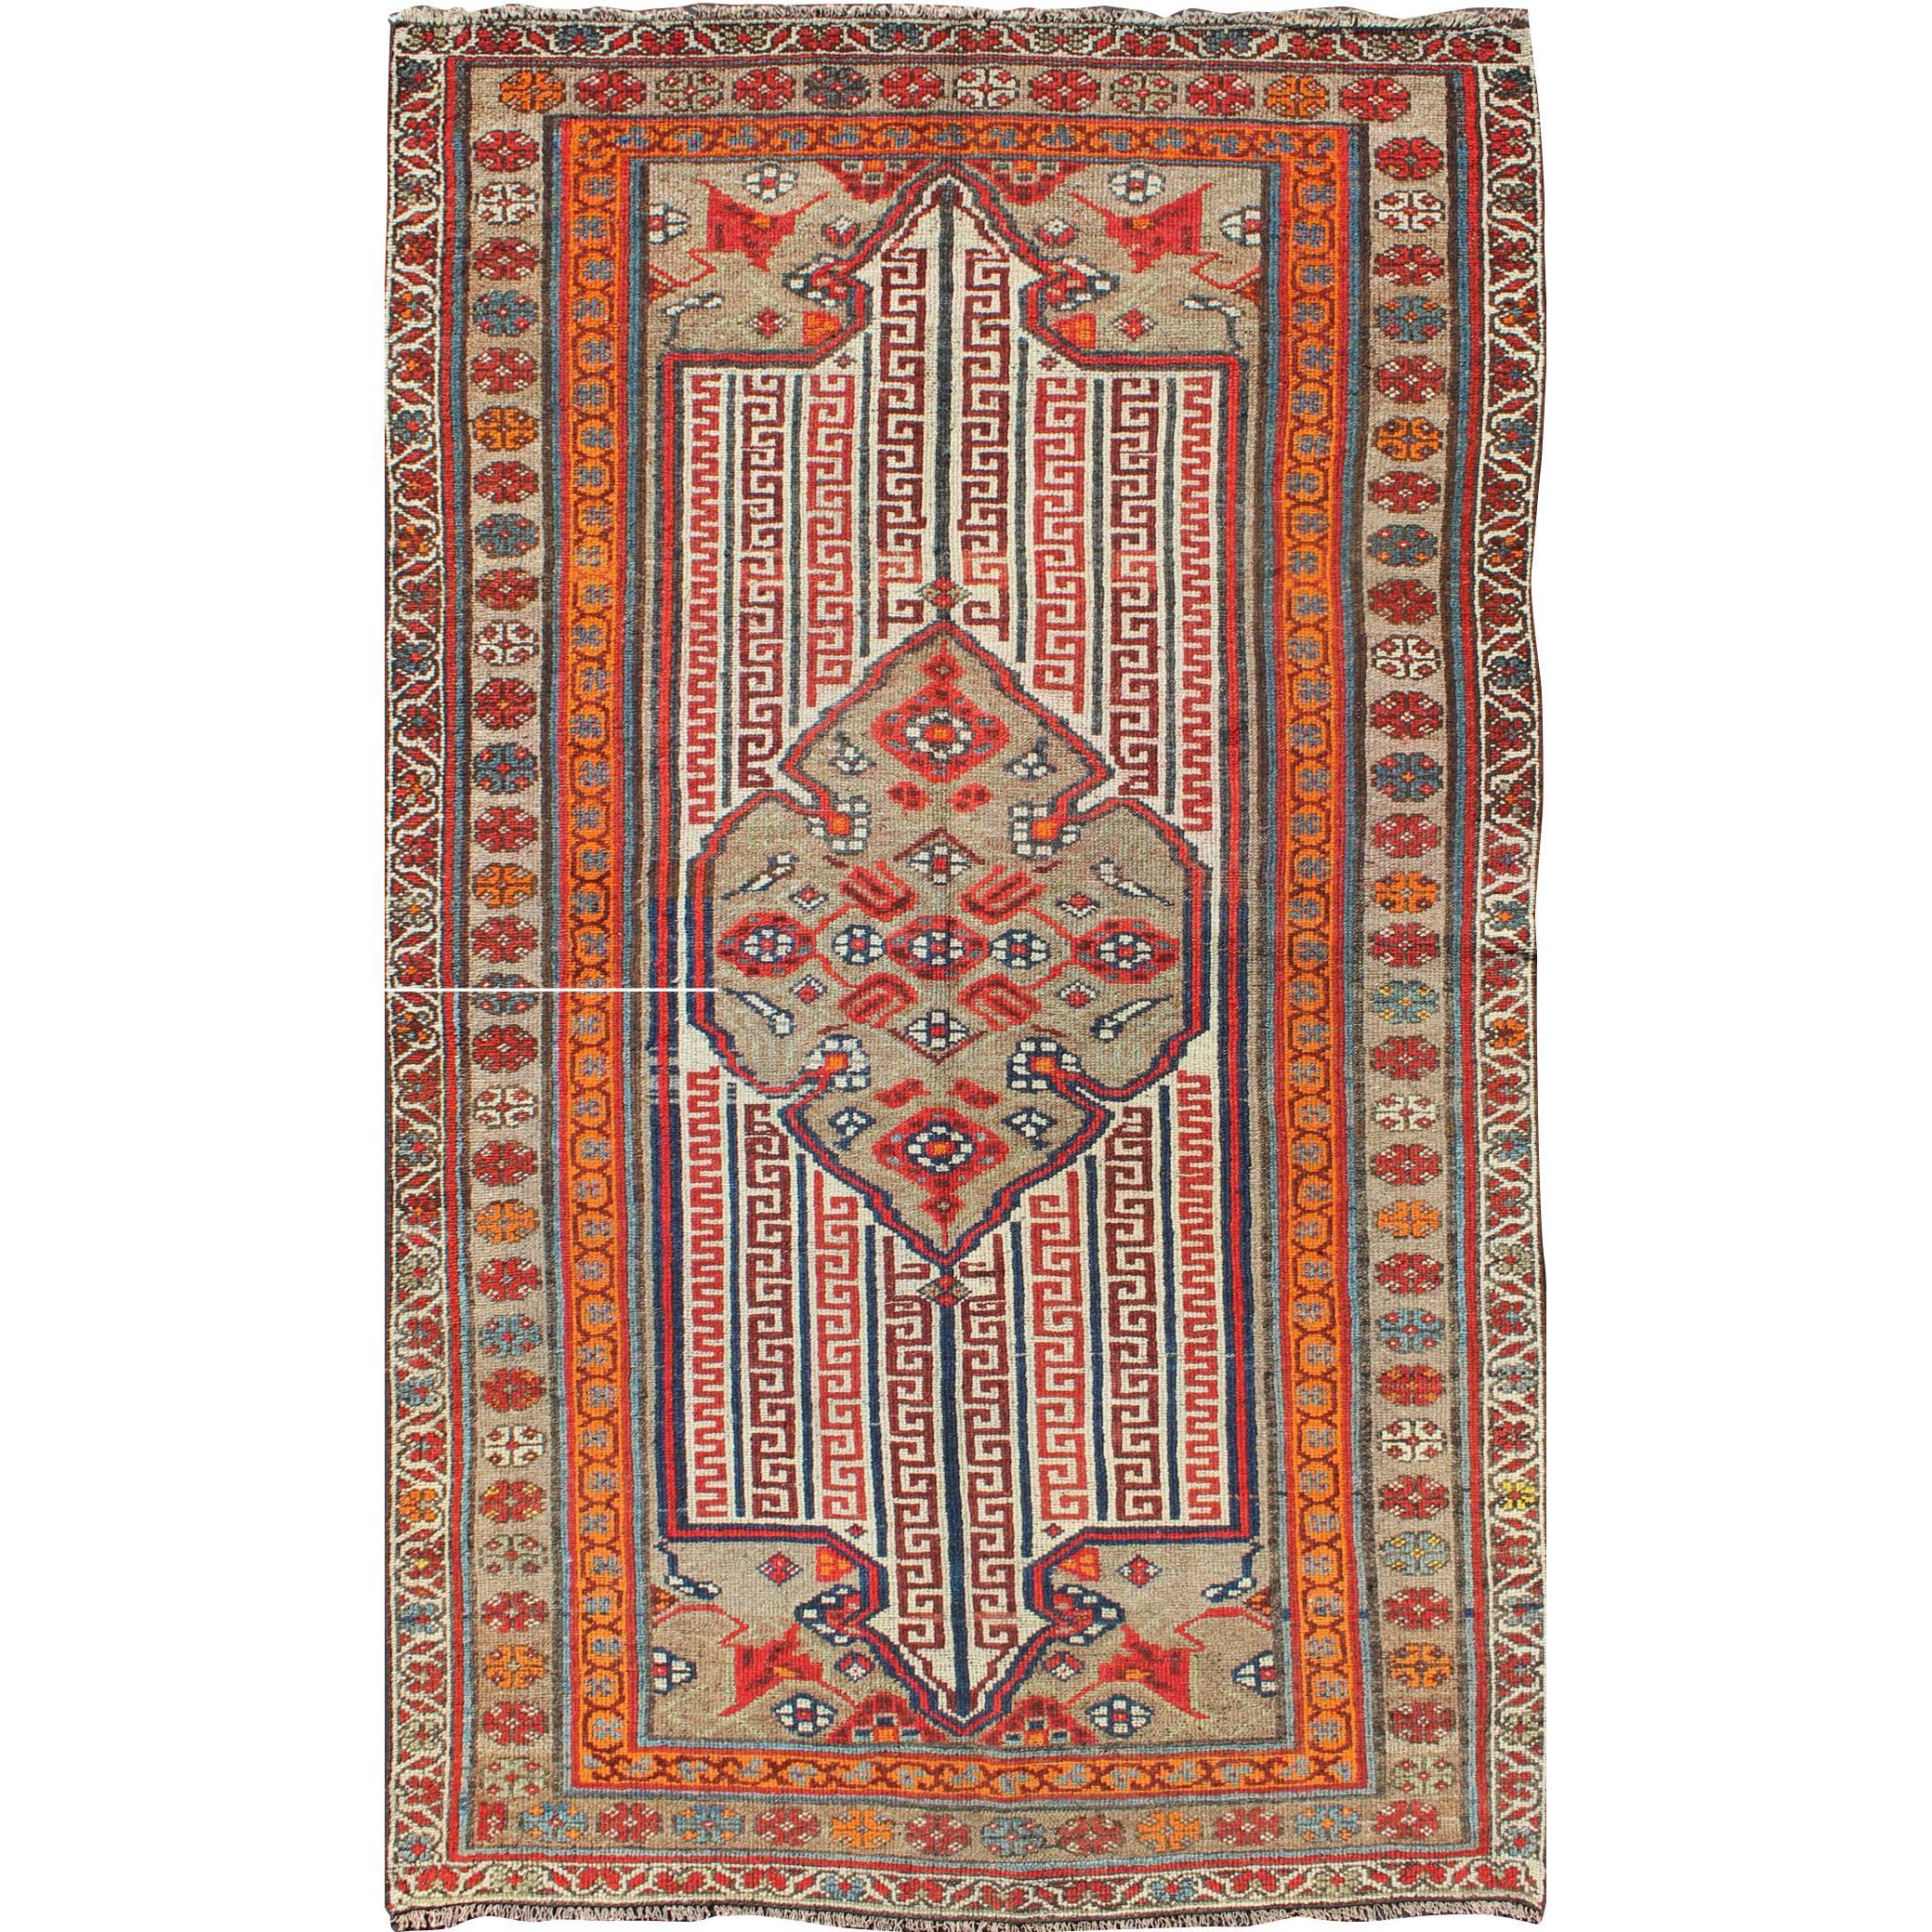 Antique Persian Seneh-Malayer Rug with Intricate Designs and Rich Color Palette